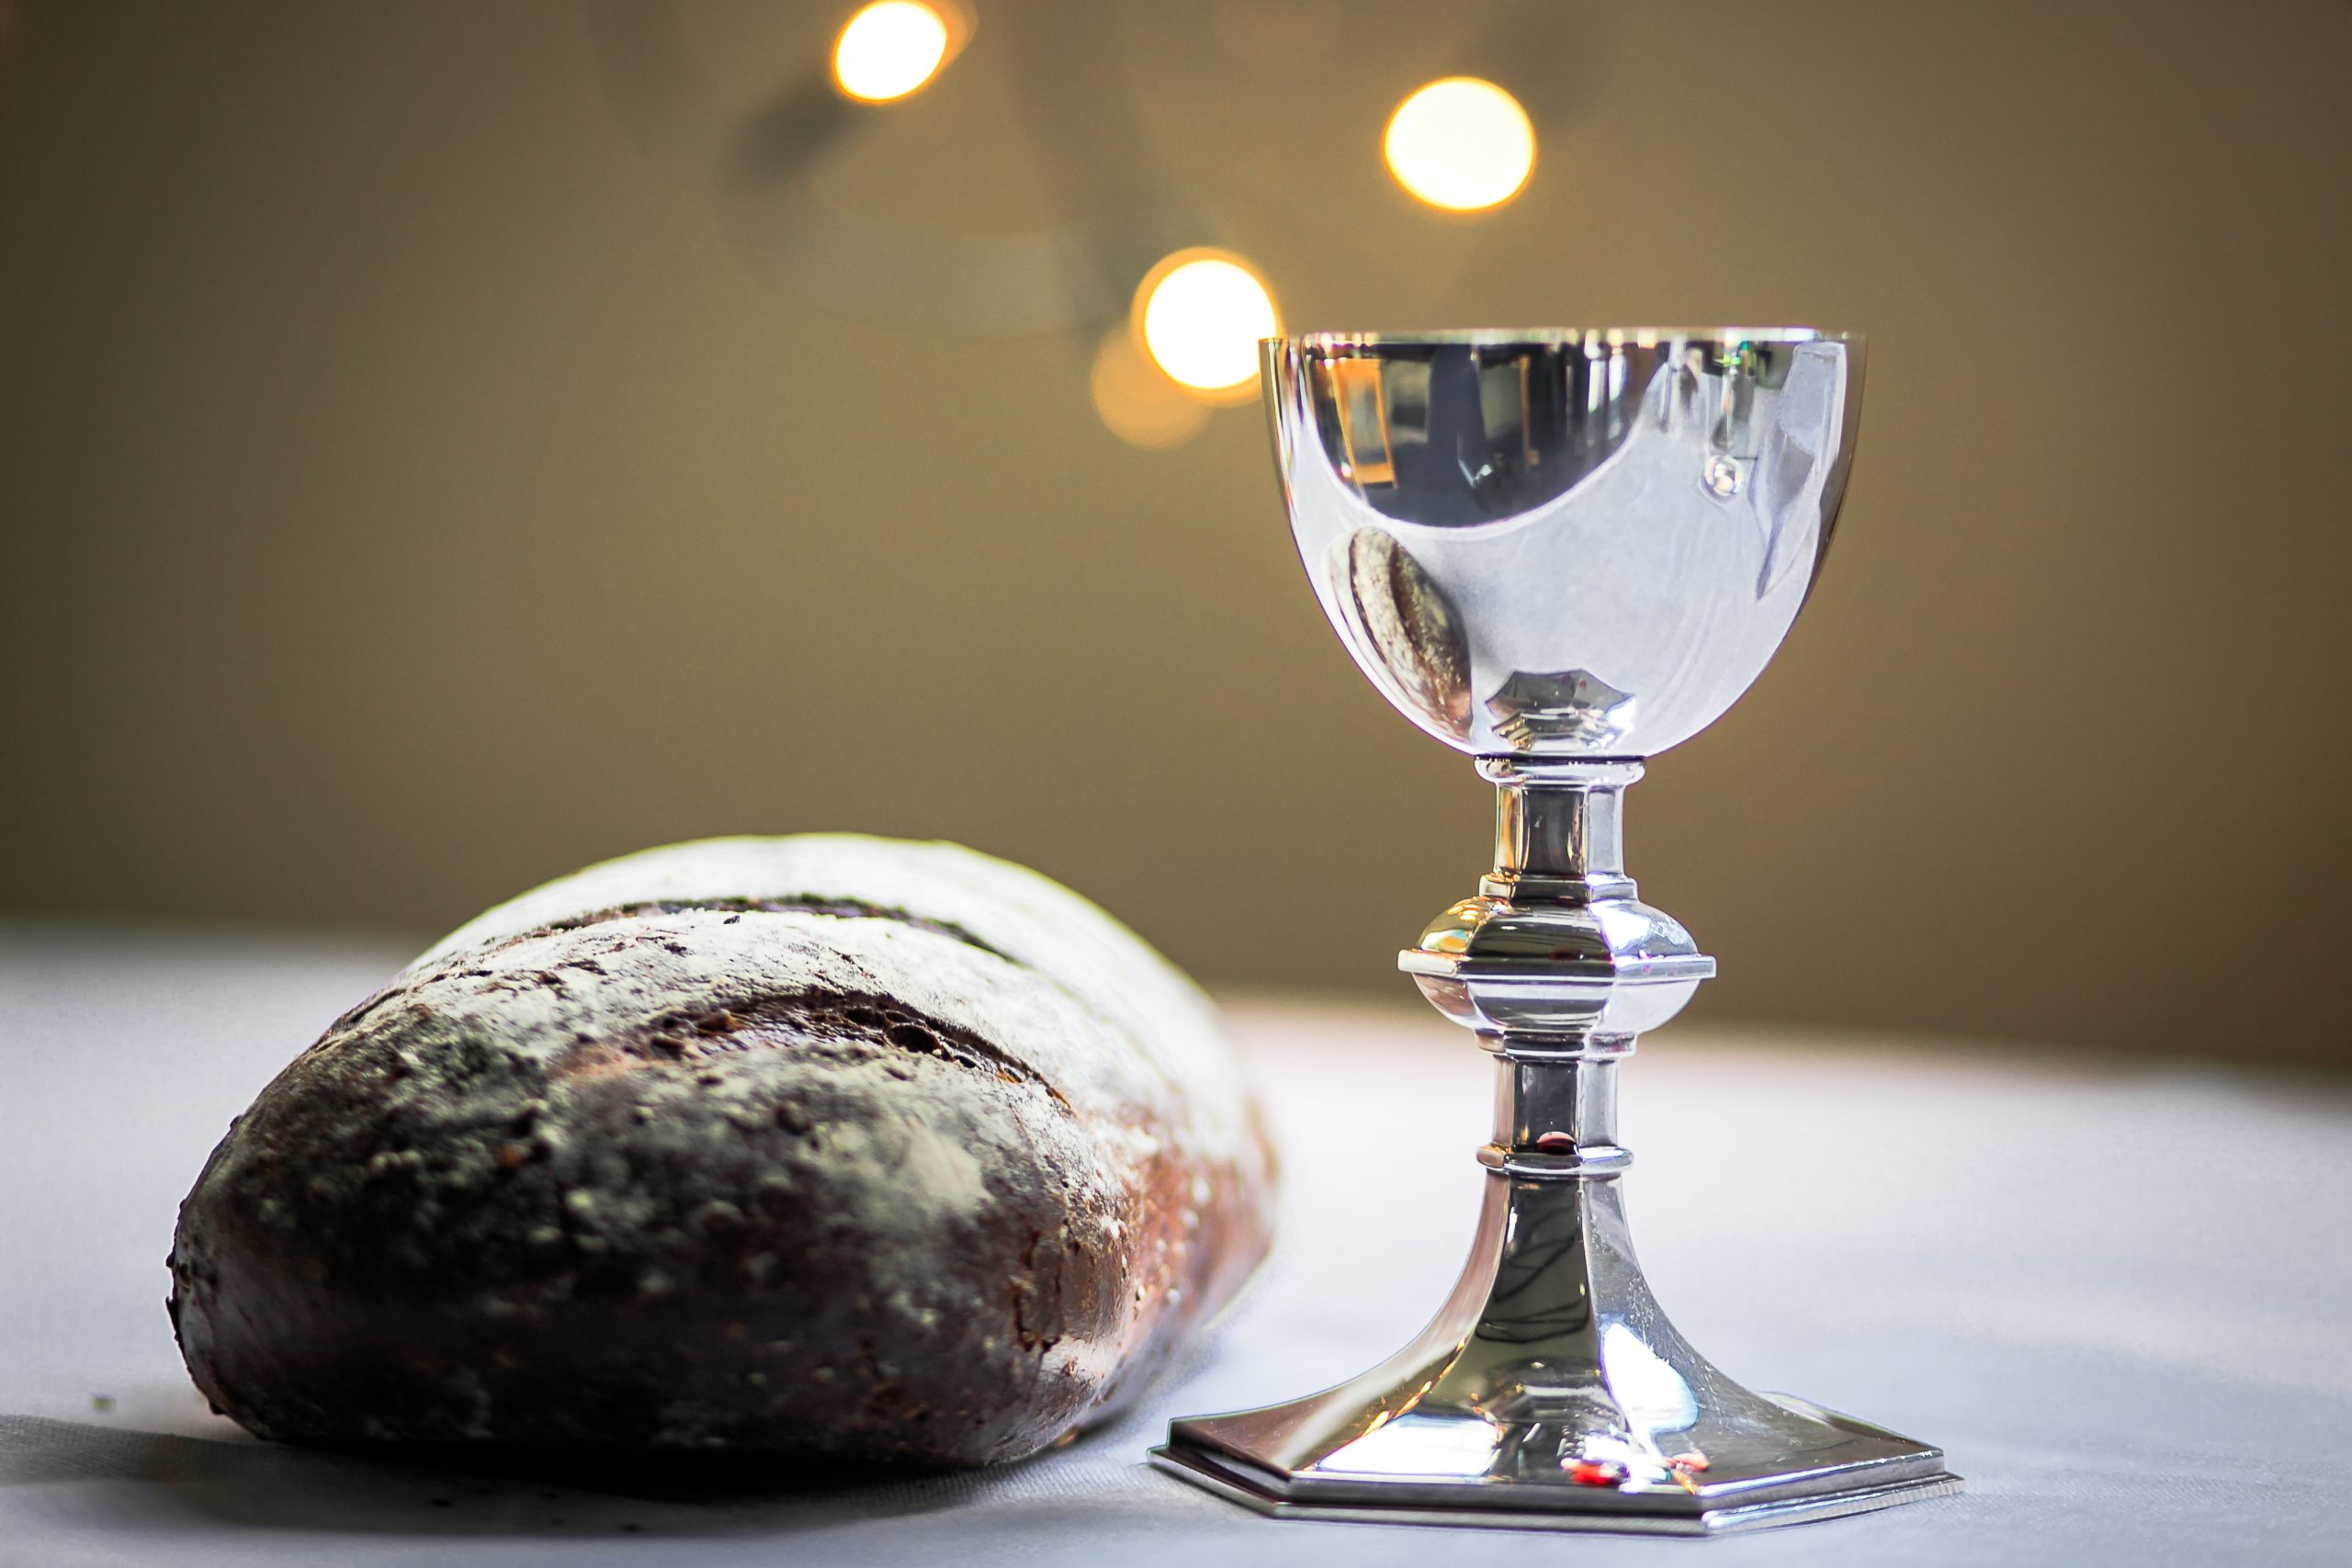 gray stainless steel chalice and bread bun